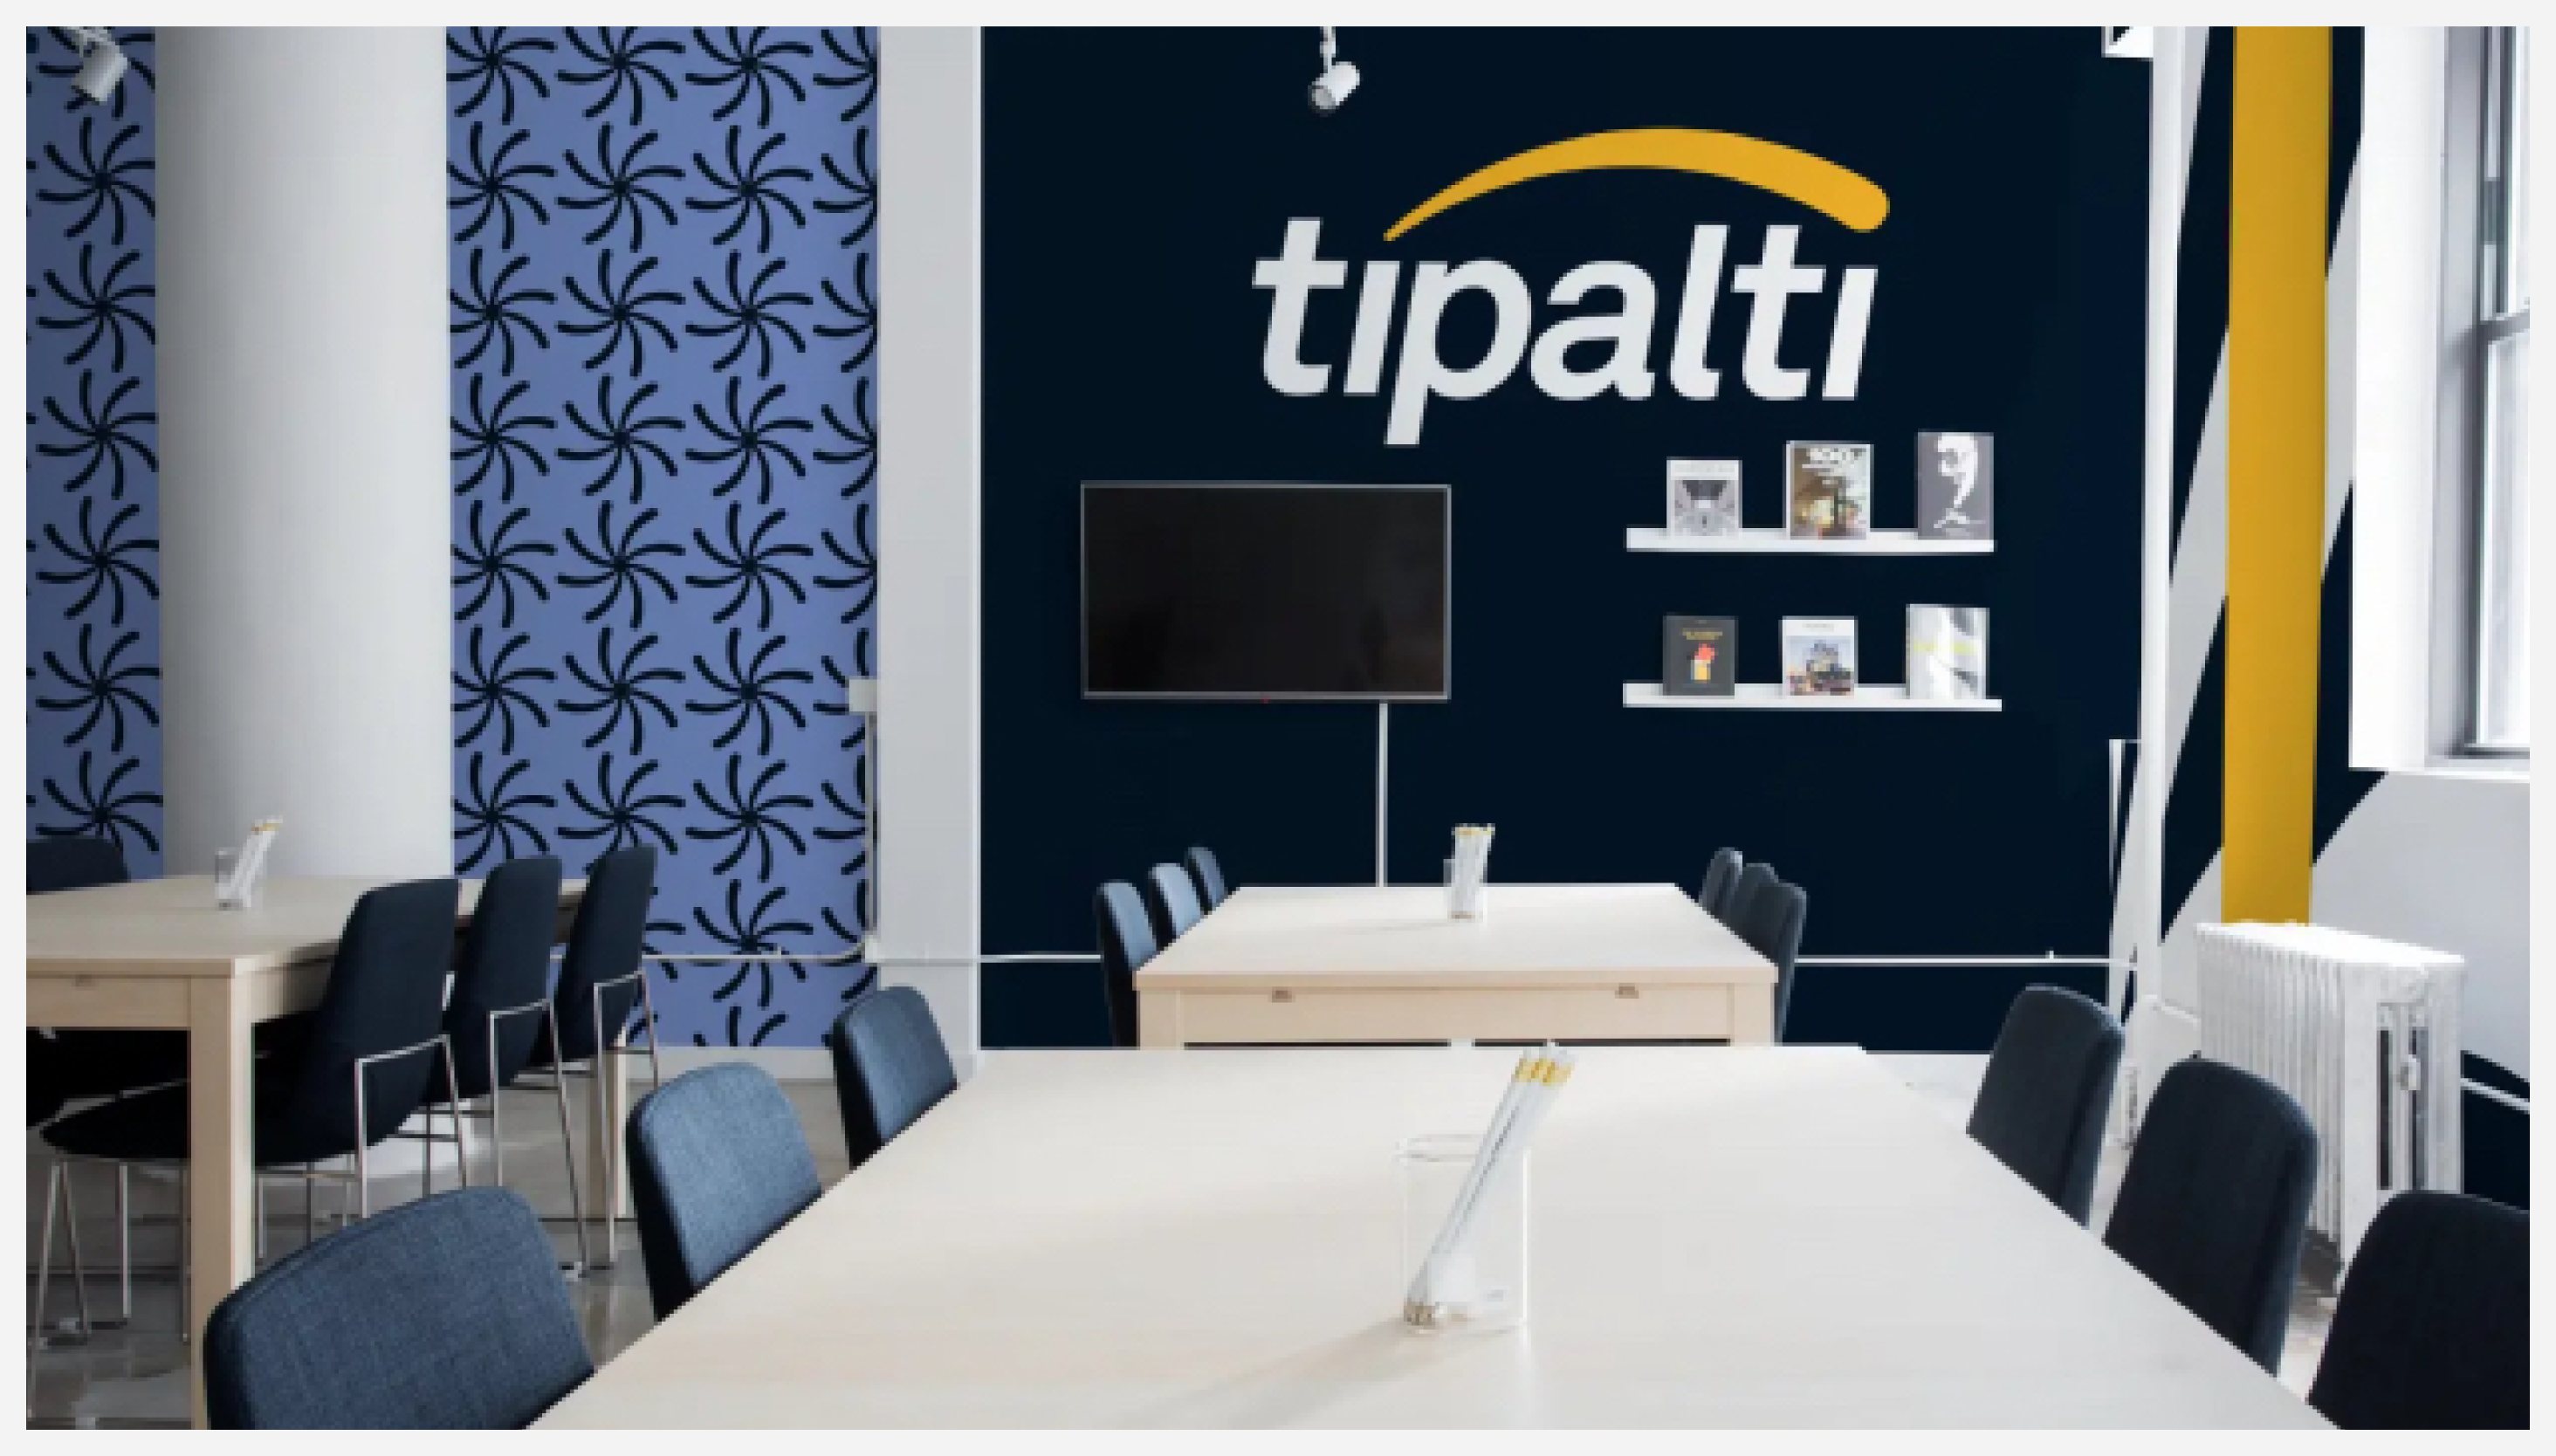 Photograph of the Tipalti office